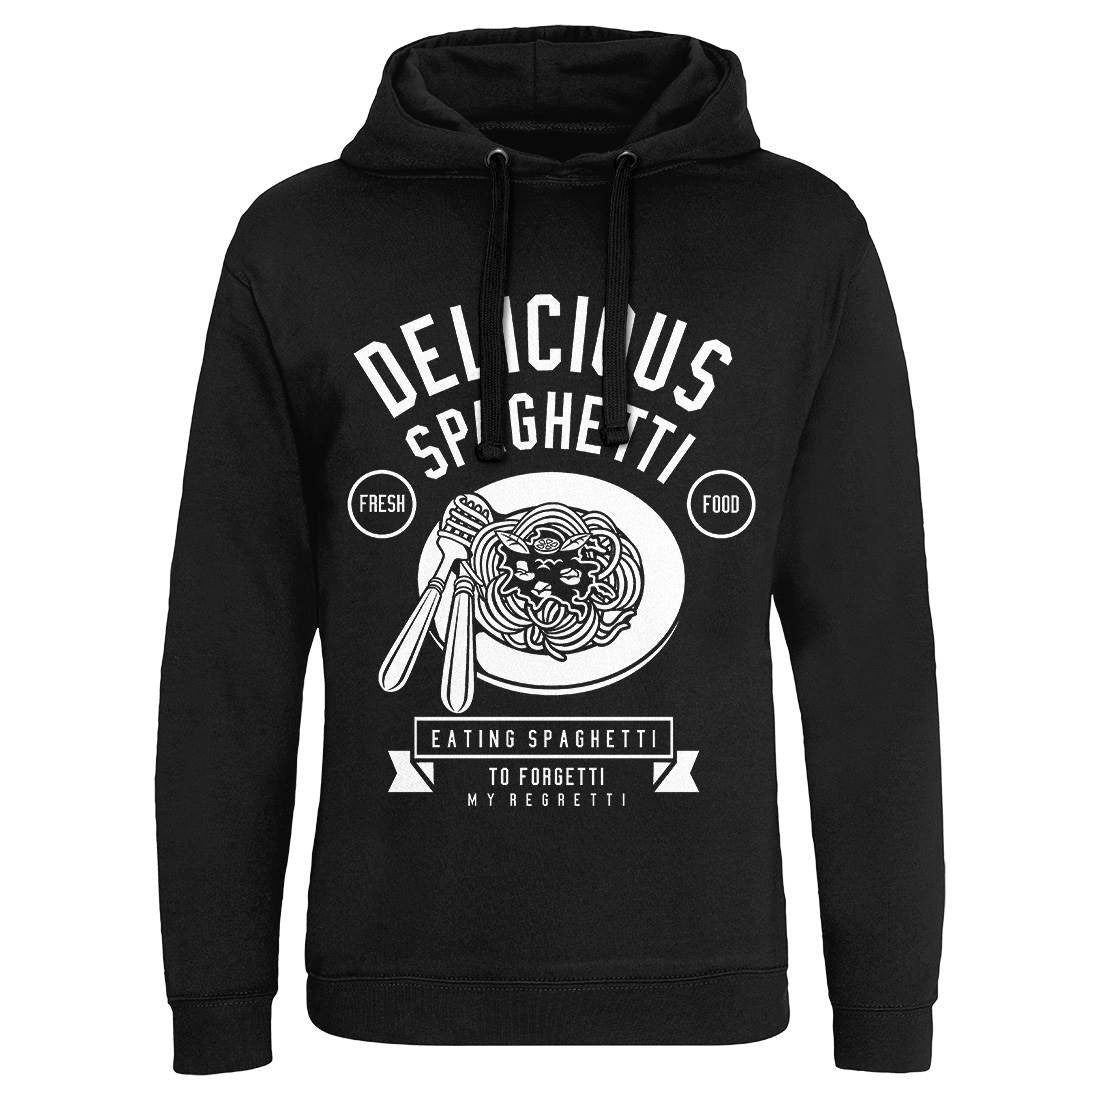 Delicious Spaghetti Mens Hoodie Without Pocket Food B530